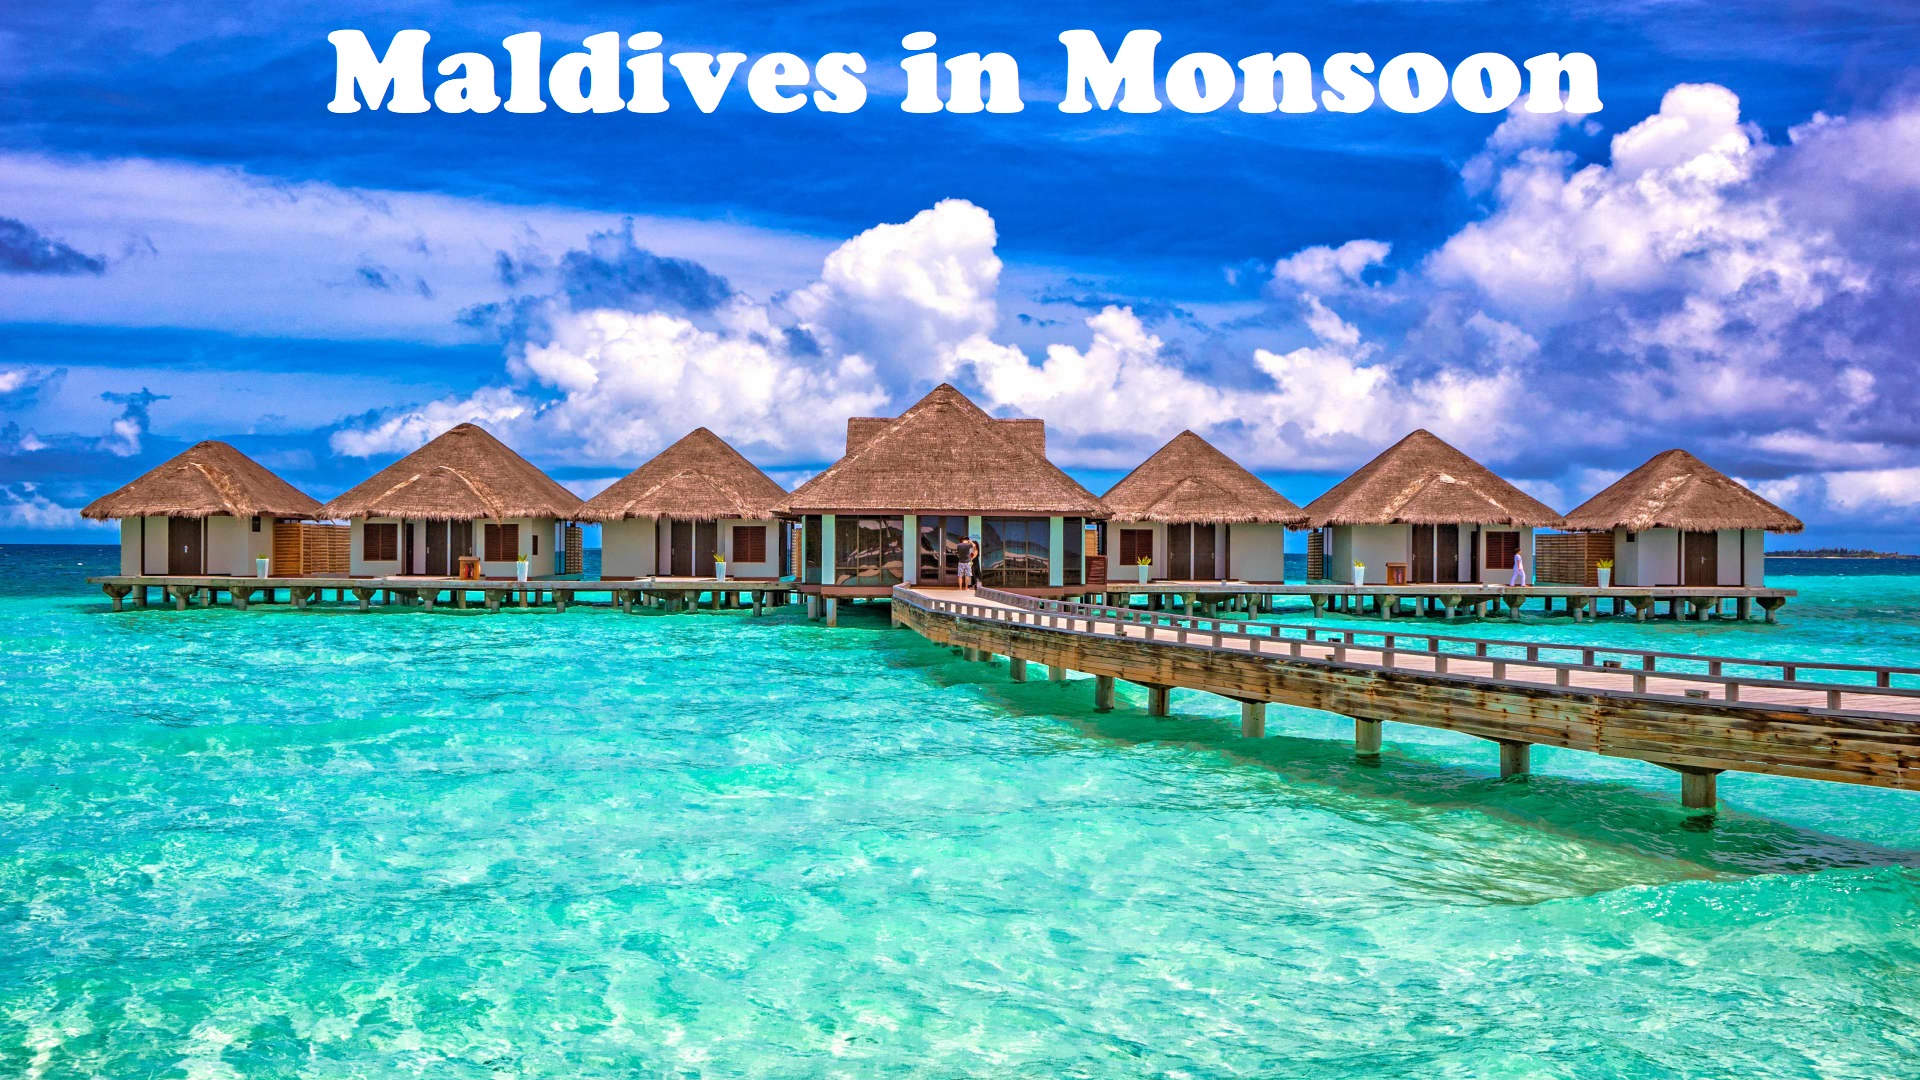 Maldives in Monsoon: Maldives want to travel on a budget, and monsoon ...